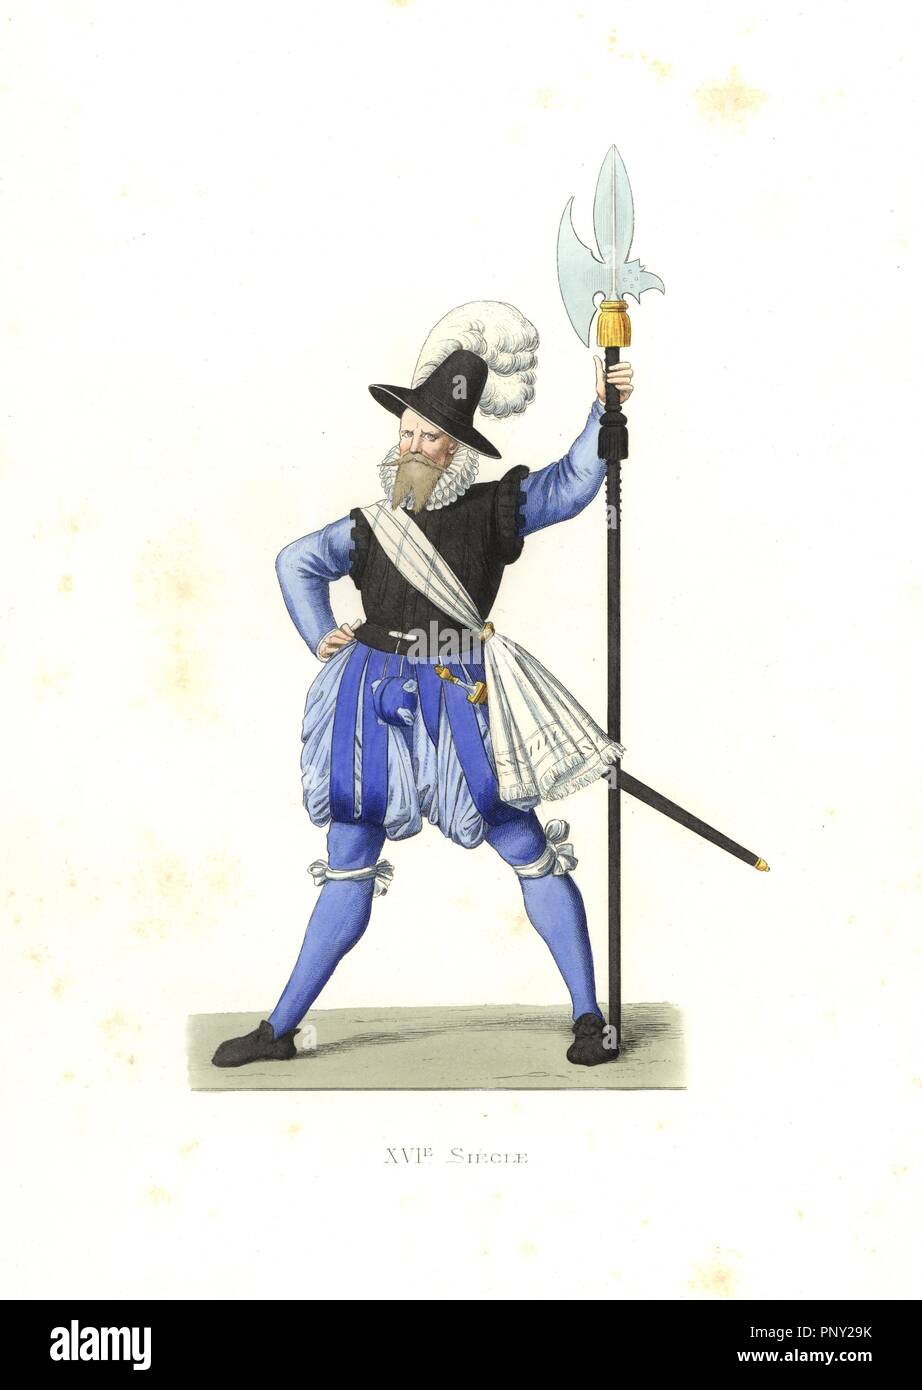 Heinrich Schmid, Swiss halberdier, 16th century. Handcolored illustration by E. Lechevallier-Chevignard, lithographed by A. Didier, L. Flameng, F. Laguillermie, from Georges Duplessis's 'Costumes historiques des XVIe, XVIIe et XVIIIe siecles' (Historical costumes of the 16th, 17th and 18th centuries), Paris 1867. The book was a continuation of the series on the costumes of the 12th to 15th centuries published by Camille Bonnard and Paul Mercuri from 1830. Georges Duplessis (1834-1899) was curator of the Prints department at the Bibliotheque nationale. Edmond Lechevallier-Chevignard (1825-1902) Stock Photo